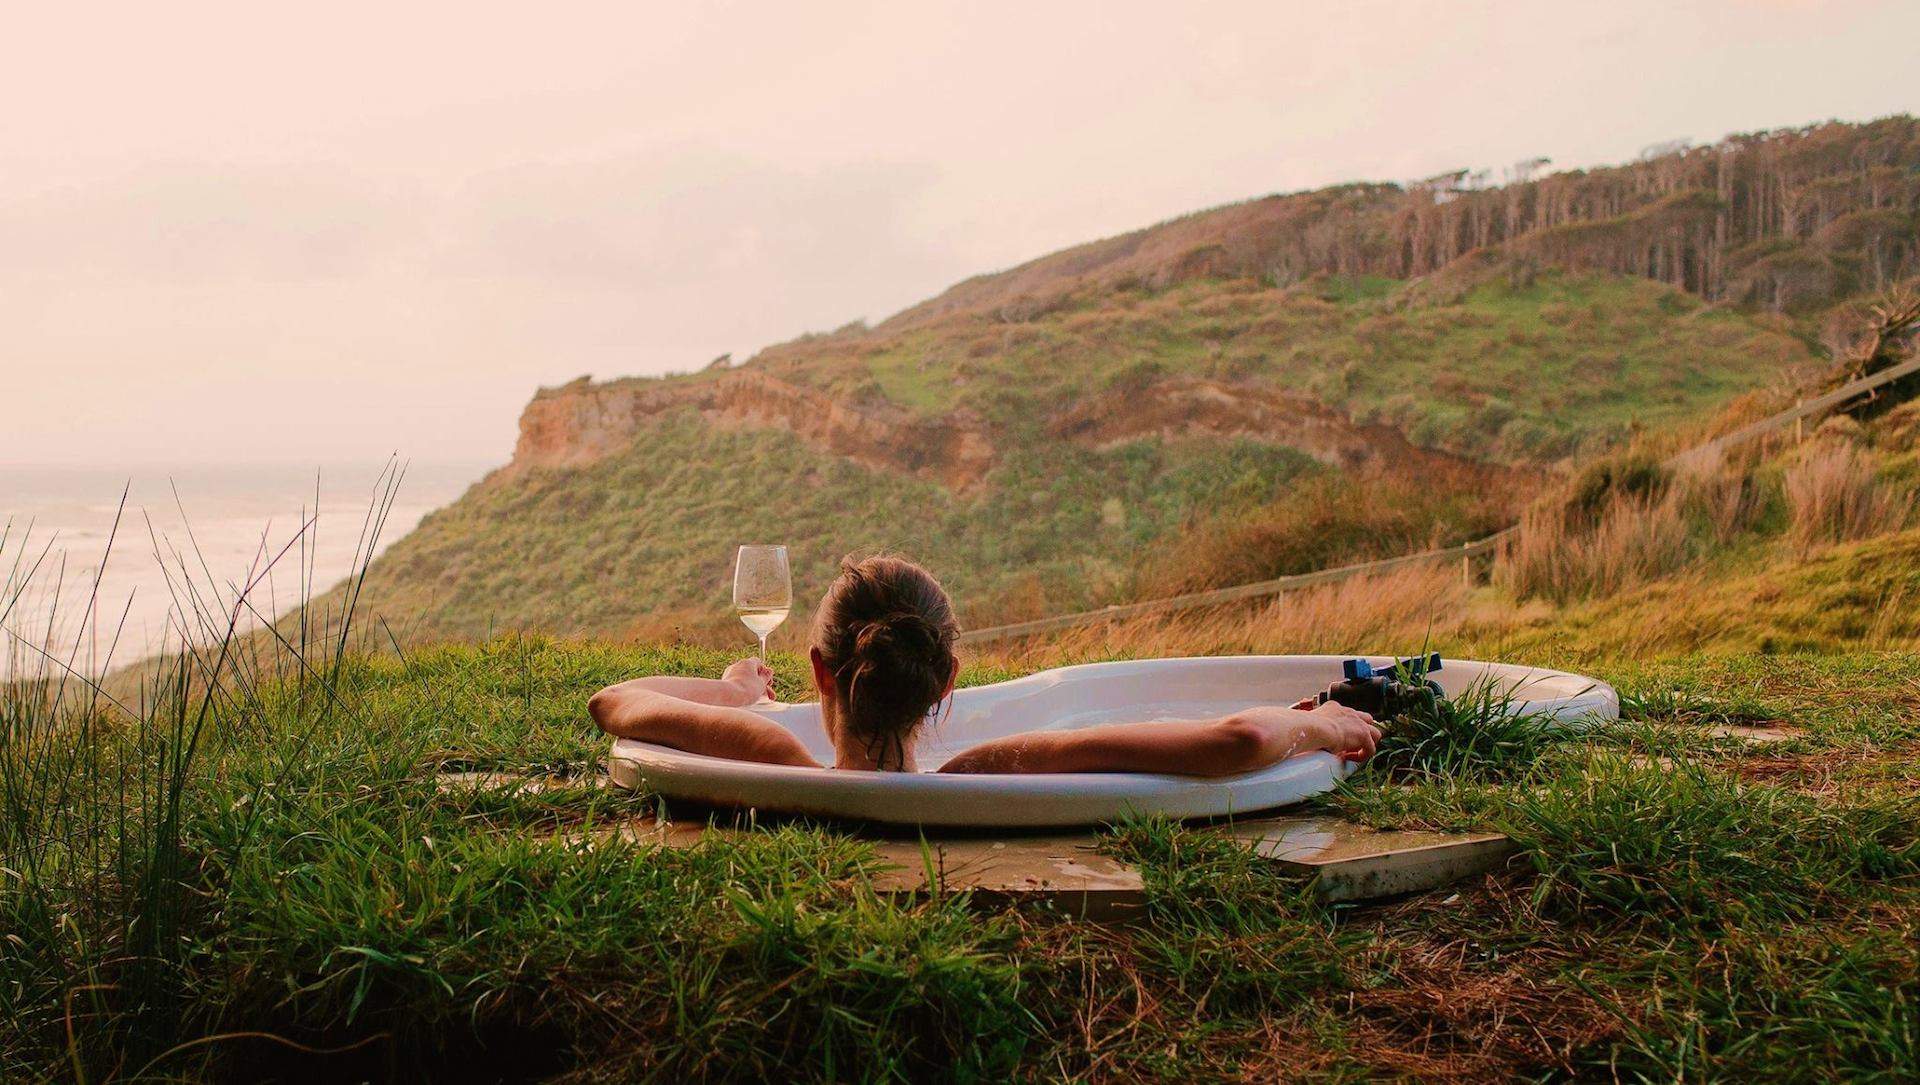 We're Giving Away a Wellness Staycation for When You Need Some Good Ol' R&R